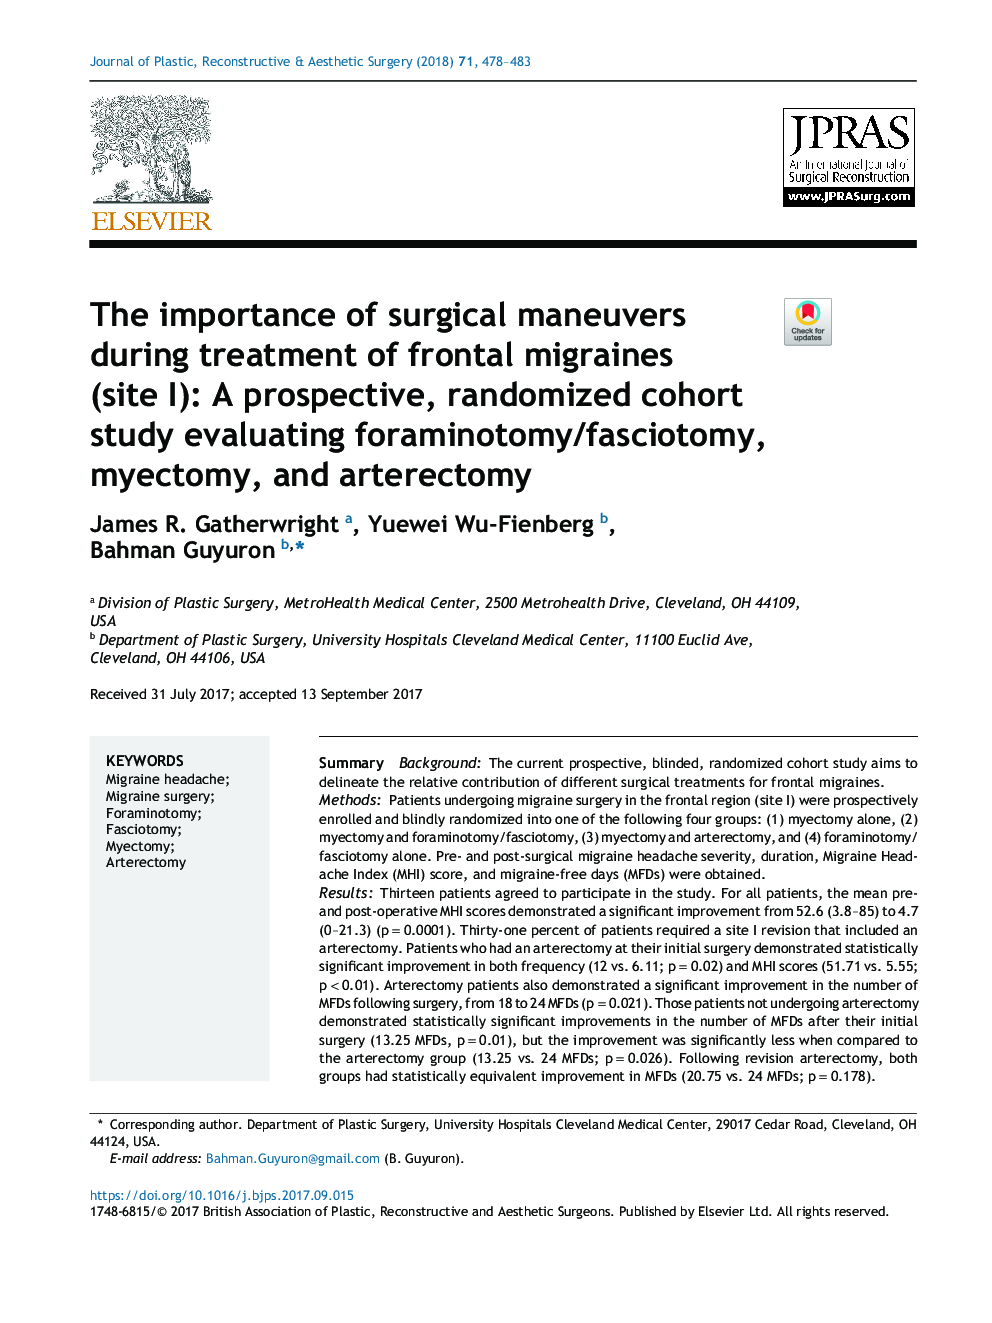 The importance of surgical maneuvers during treatment of frontal migraines (site I): A prospective, randomized cohort study evaluating foraminotomy/fasciotomy, myectomy, and arterectomy